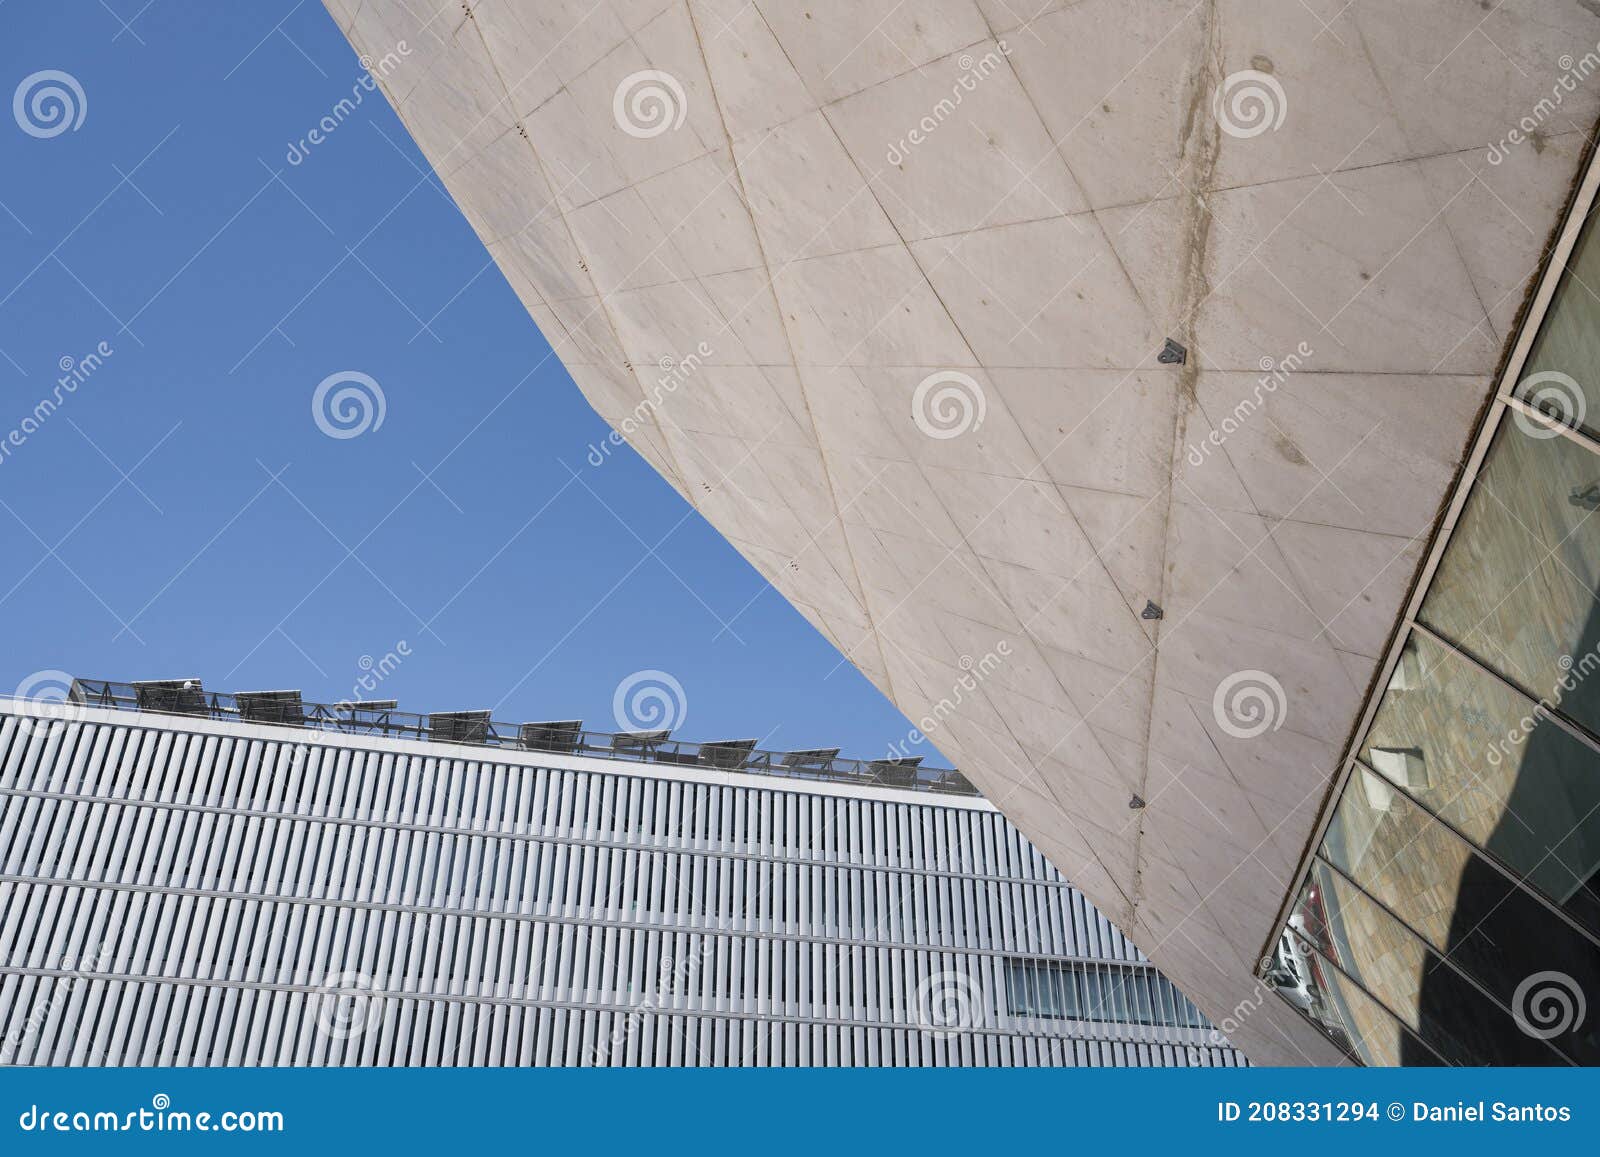 abstract image of two modern buildings - modern architecture. close up shot of the casa da musica do porto porto music house.